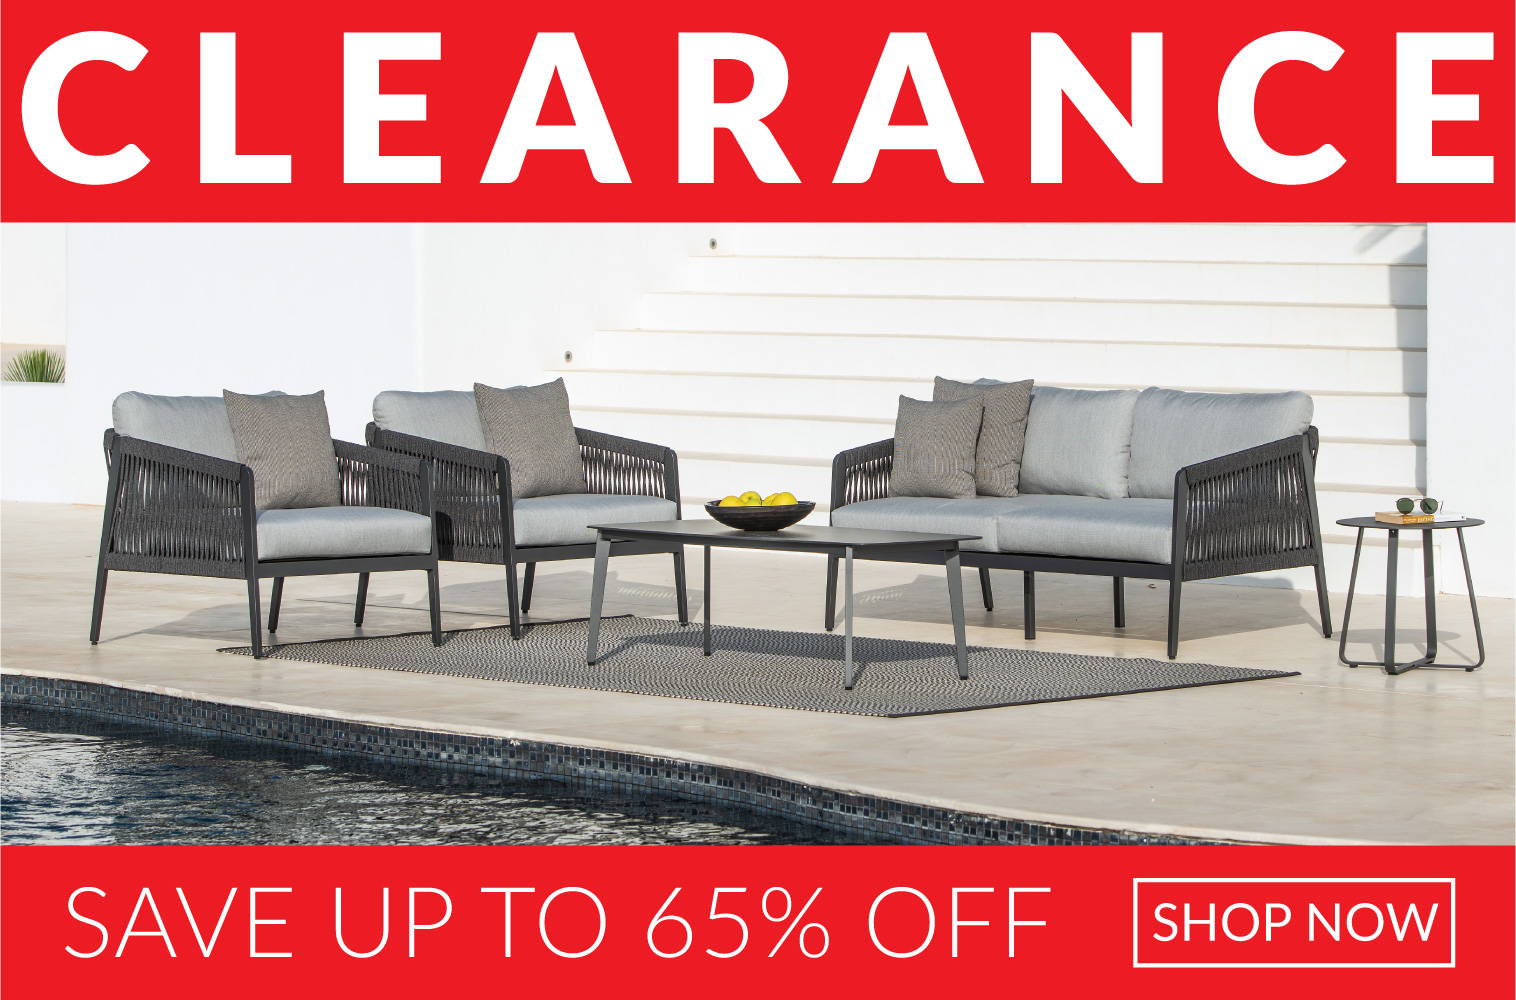 Clearance Sale Ritz Aluminum Outdoor Seating Save up to 60% off